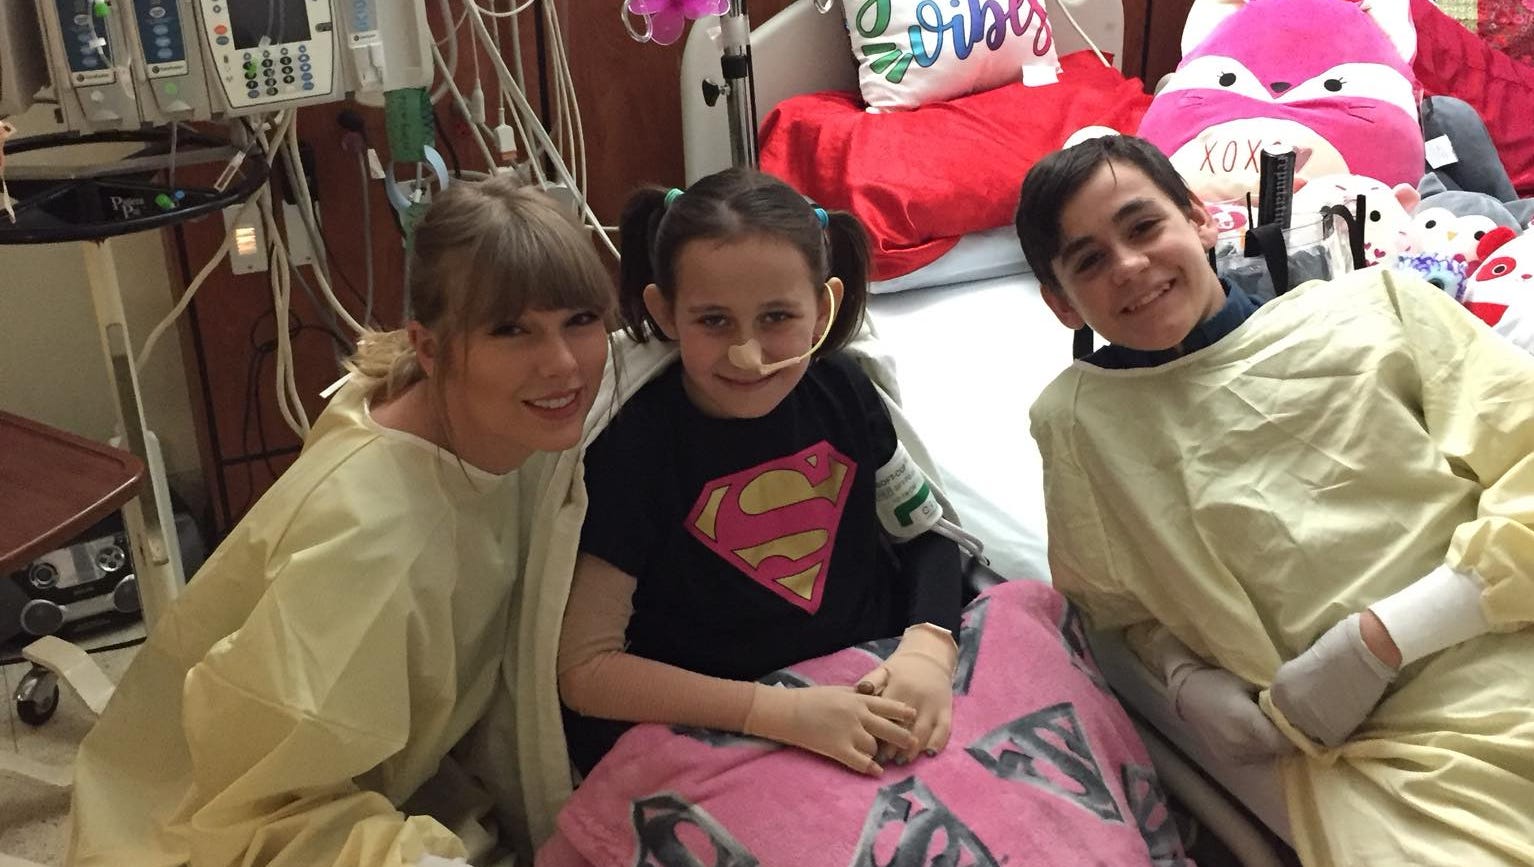 Taylor Swift promised a young burn survivor she'd see a concert. She kept that promise